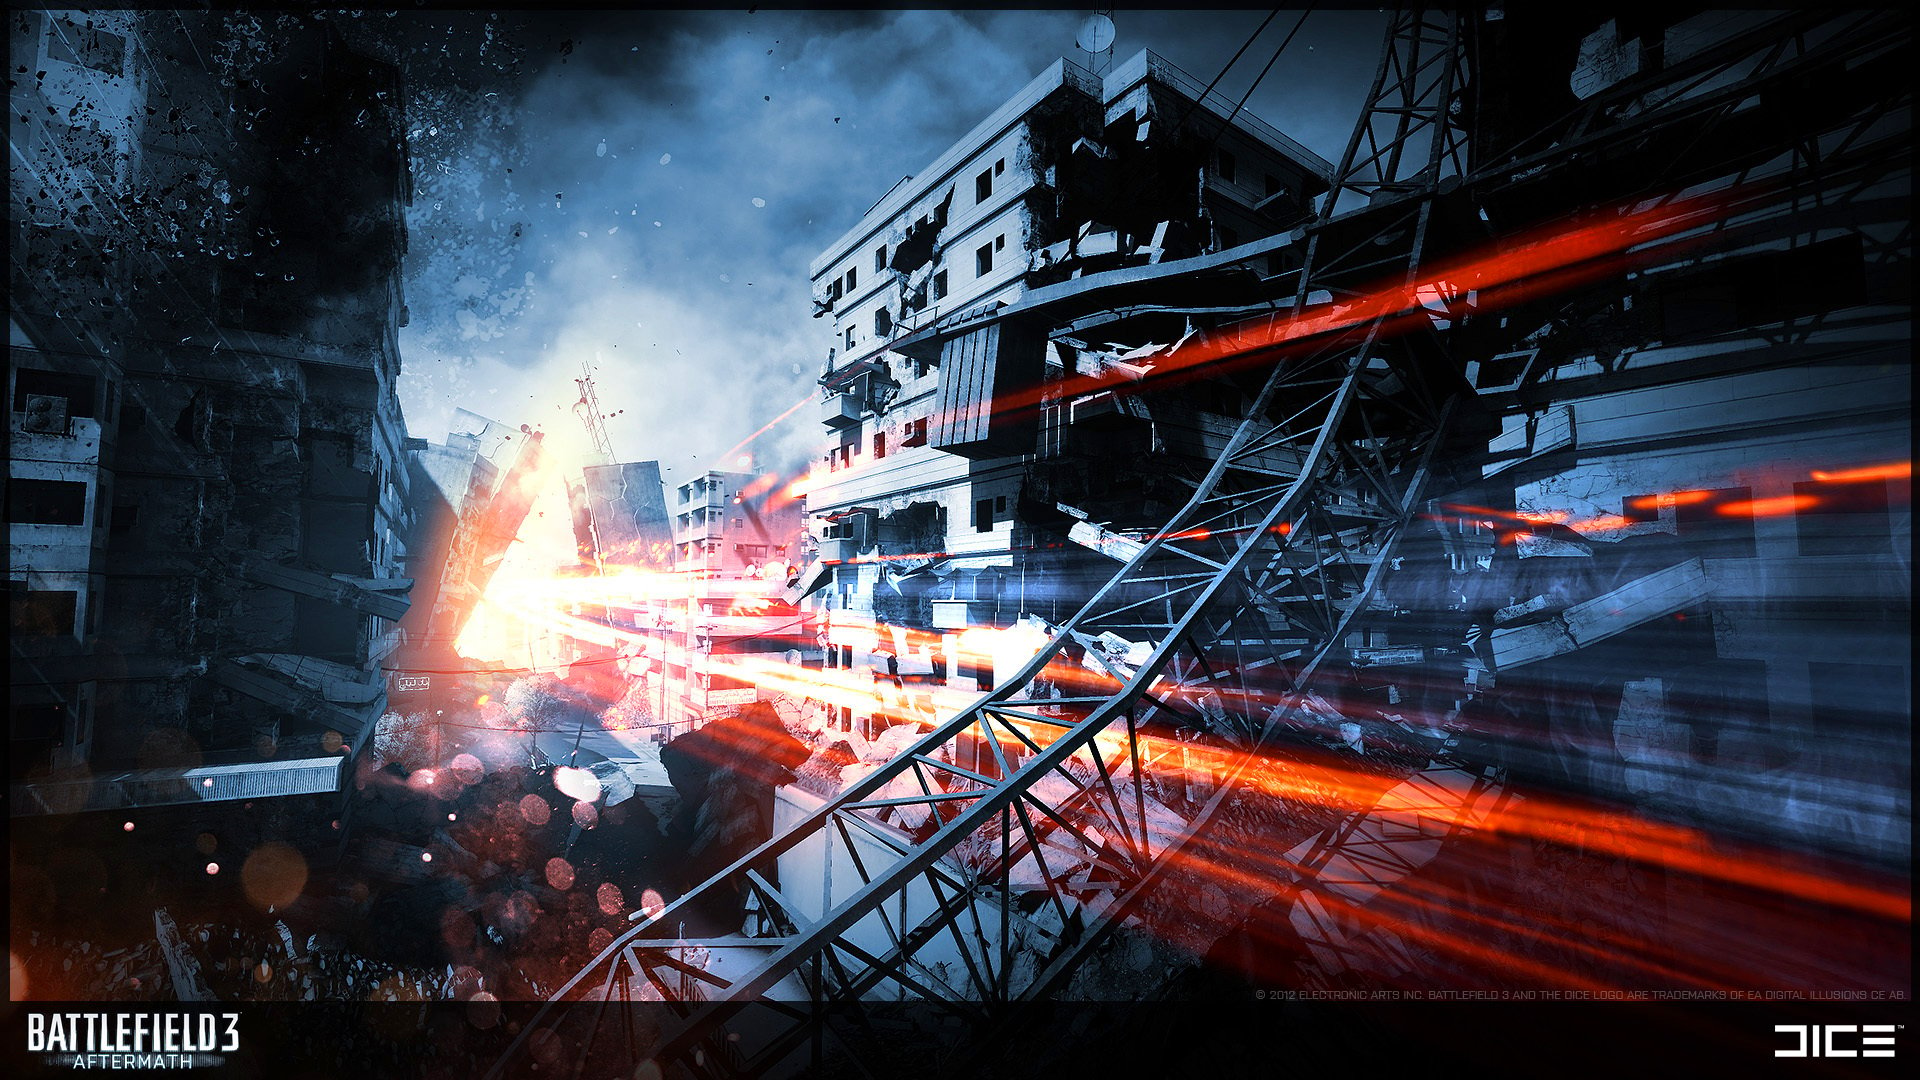 Battlefield 3 Aftermath Epicenter Wallpapers HD Wallpapers